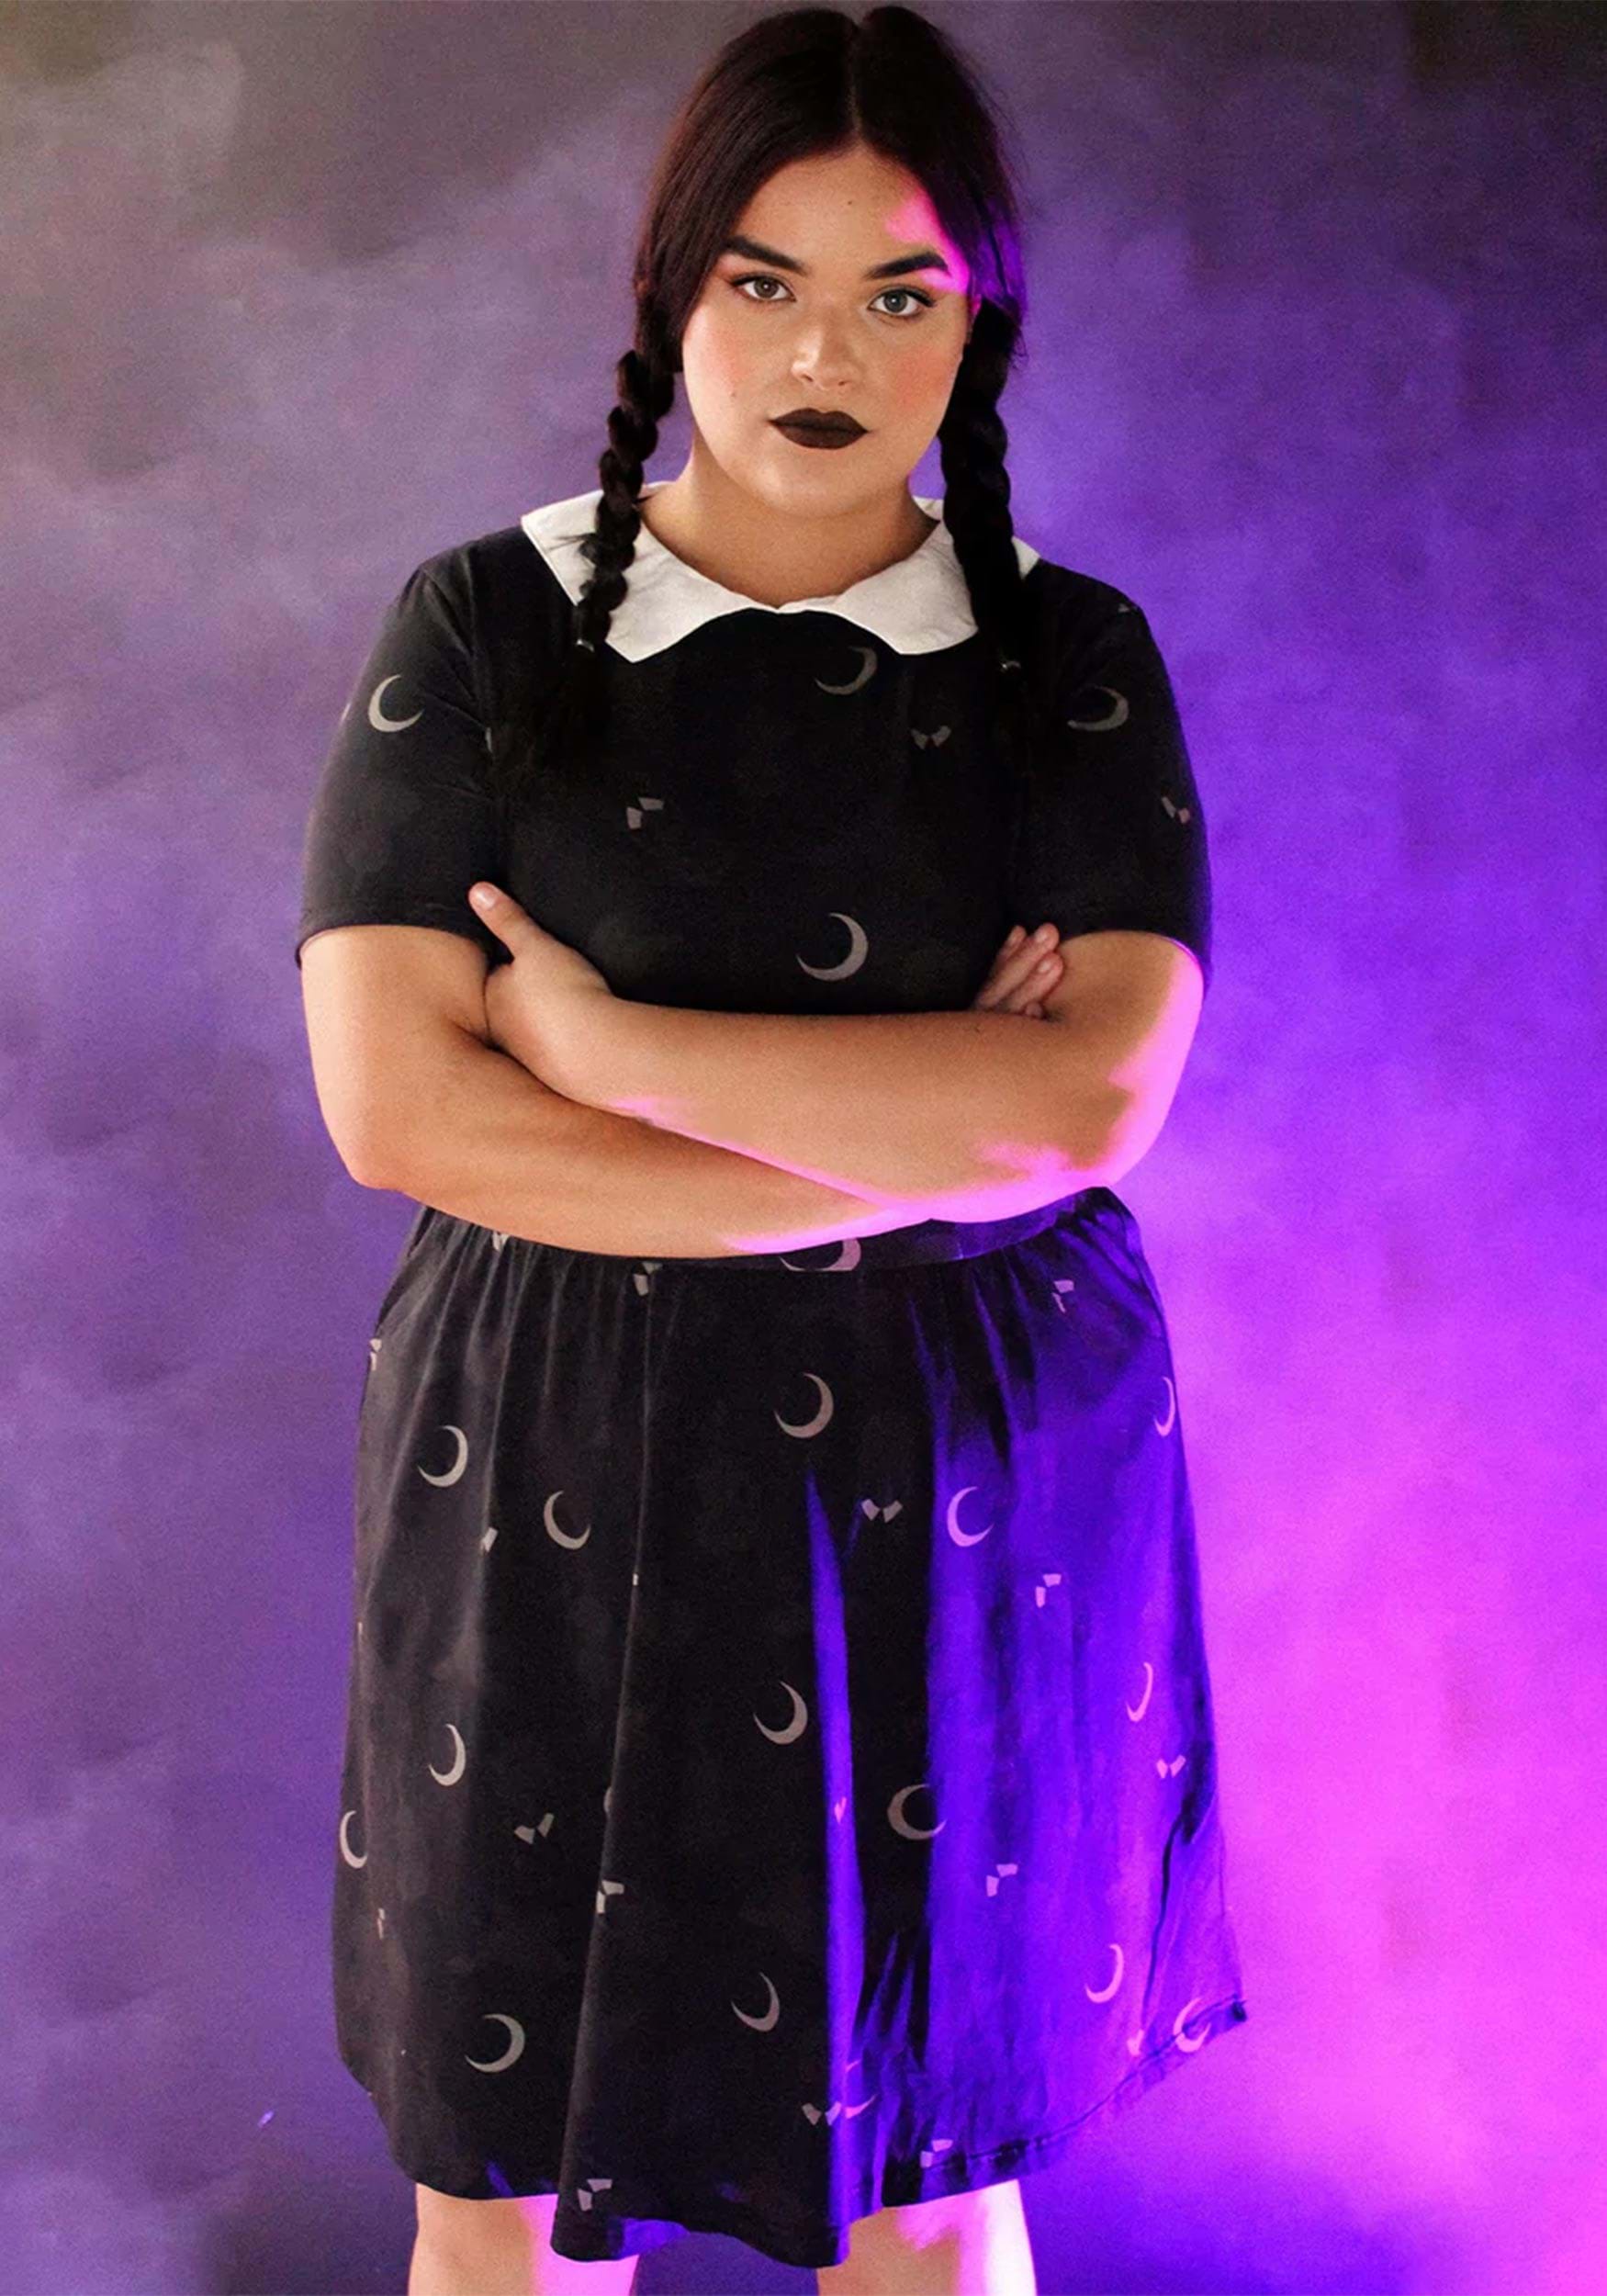 Best Gothcore Dresses | Wednesday Addams Inspired Outfits | Gothcore  Aesthetic